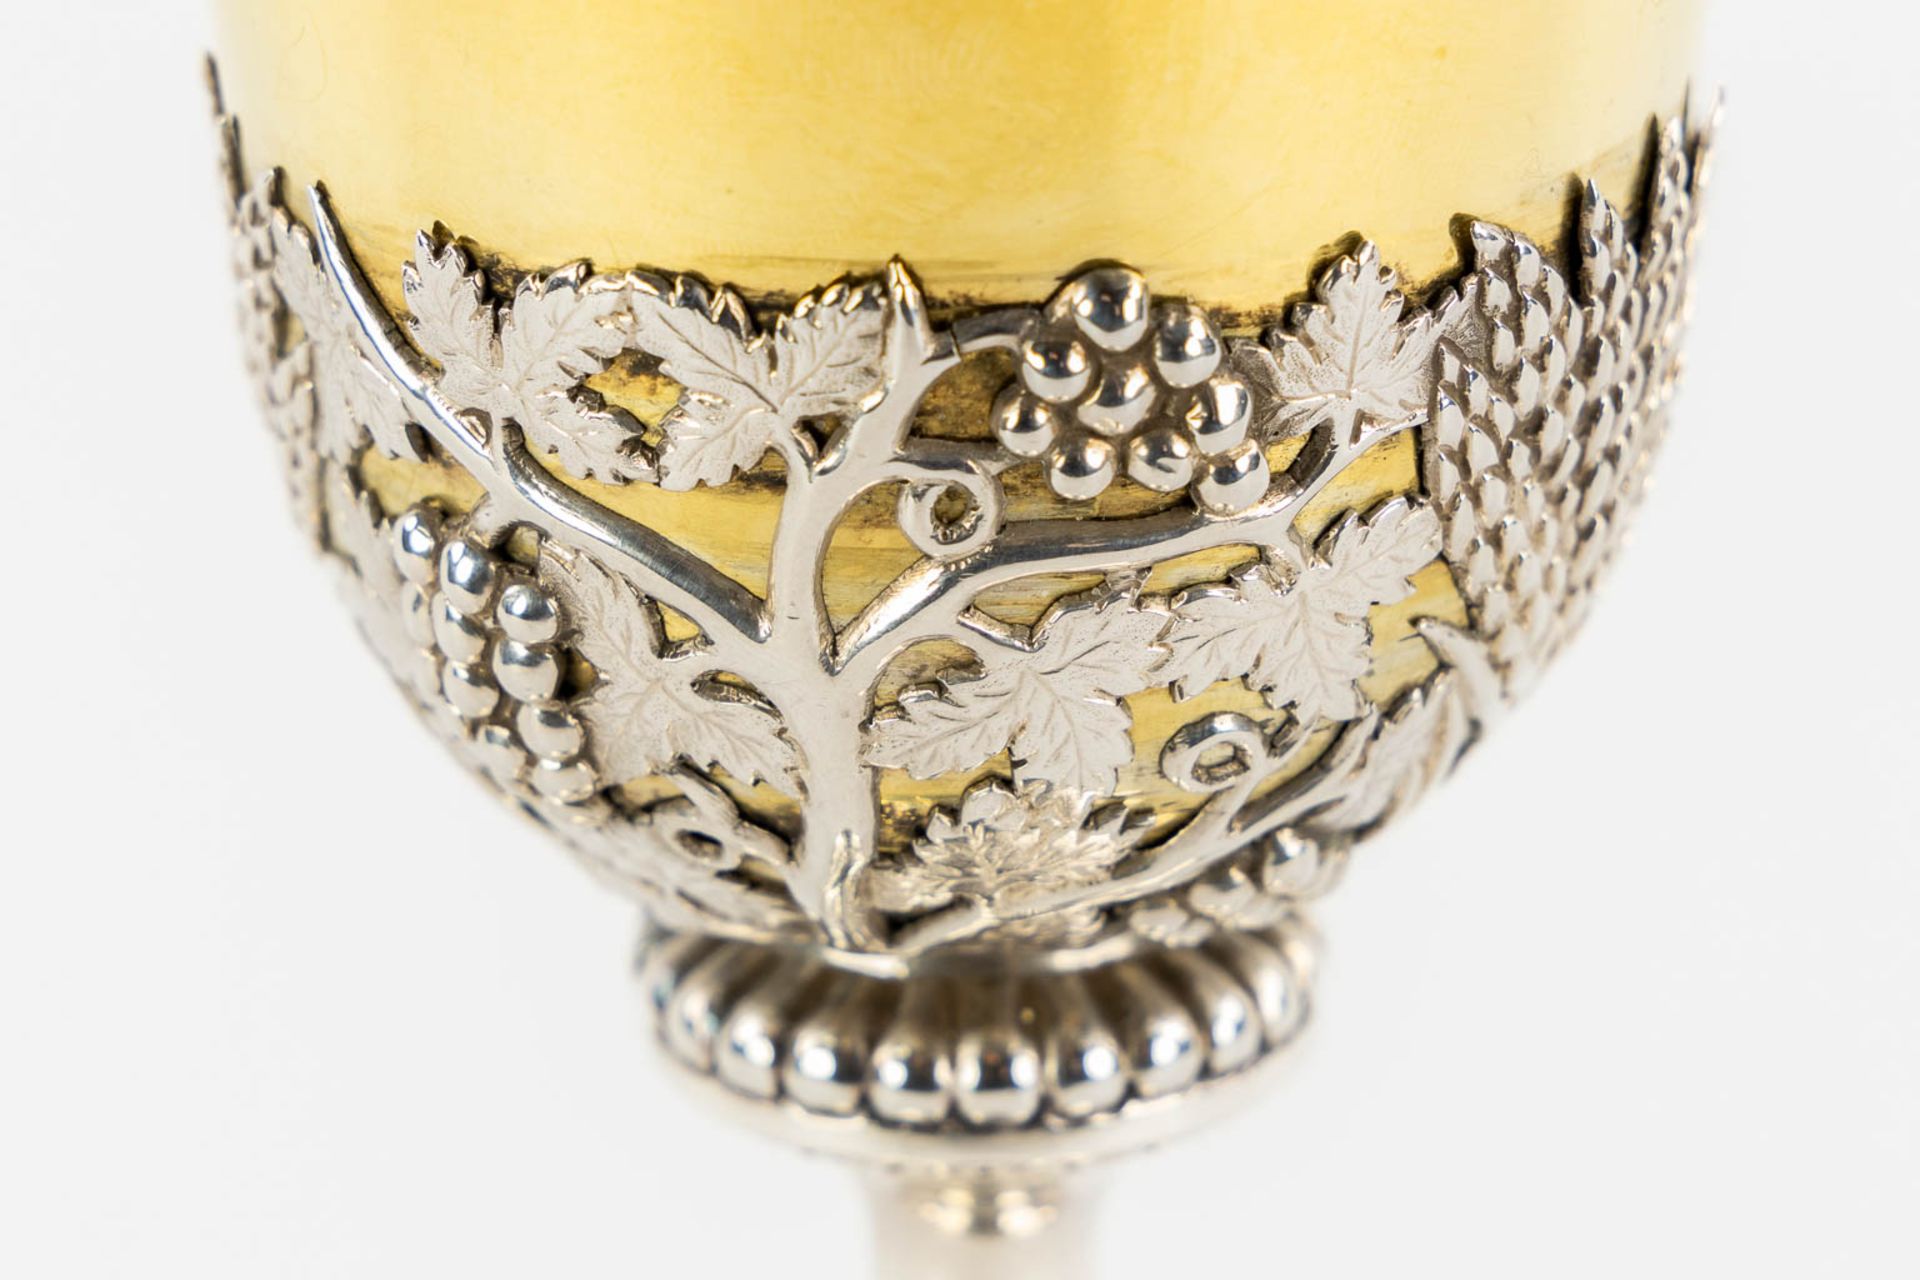 A chalice, silver-plated metal and gold-plated silver, Gothic Revival. 19th C. (H:27 x D:15 cm) - Bild 8 aus 9